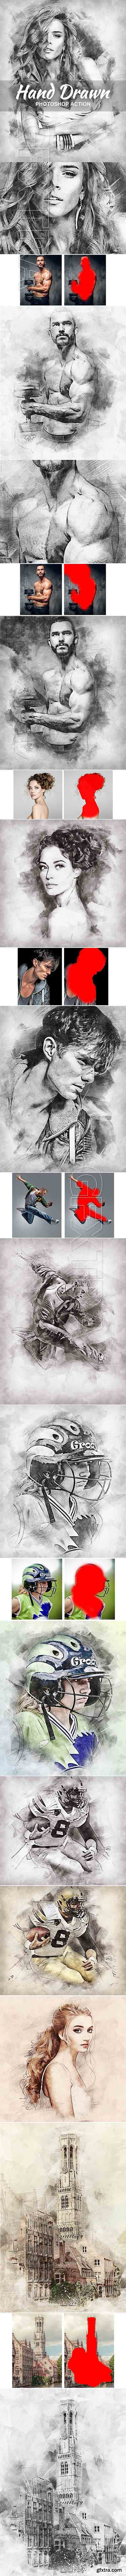 GraphicRiver - Hand Drawn Photoshop Action 21151344